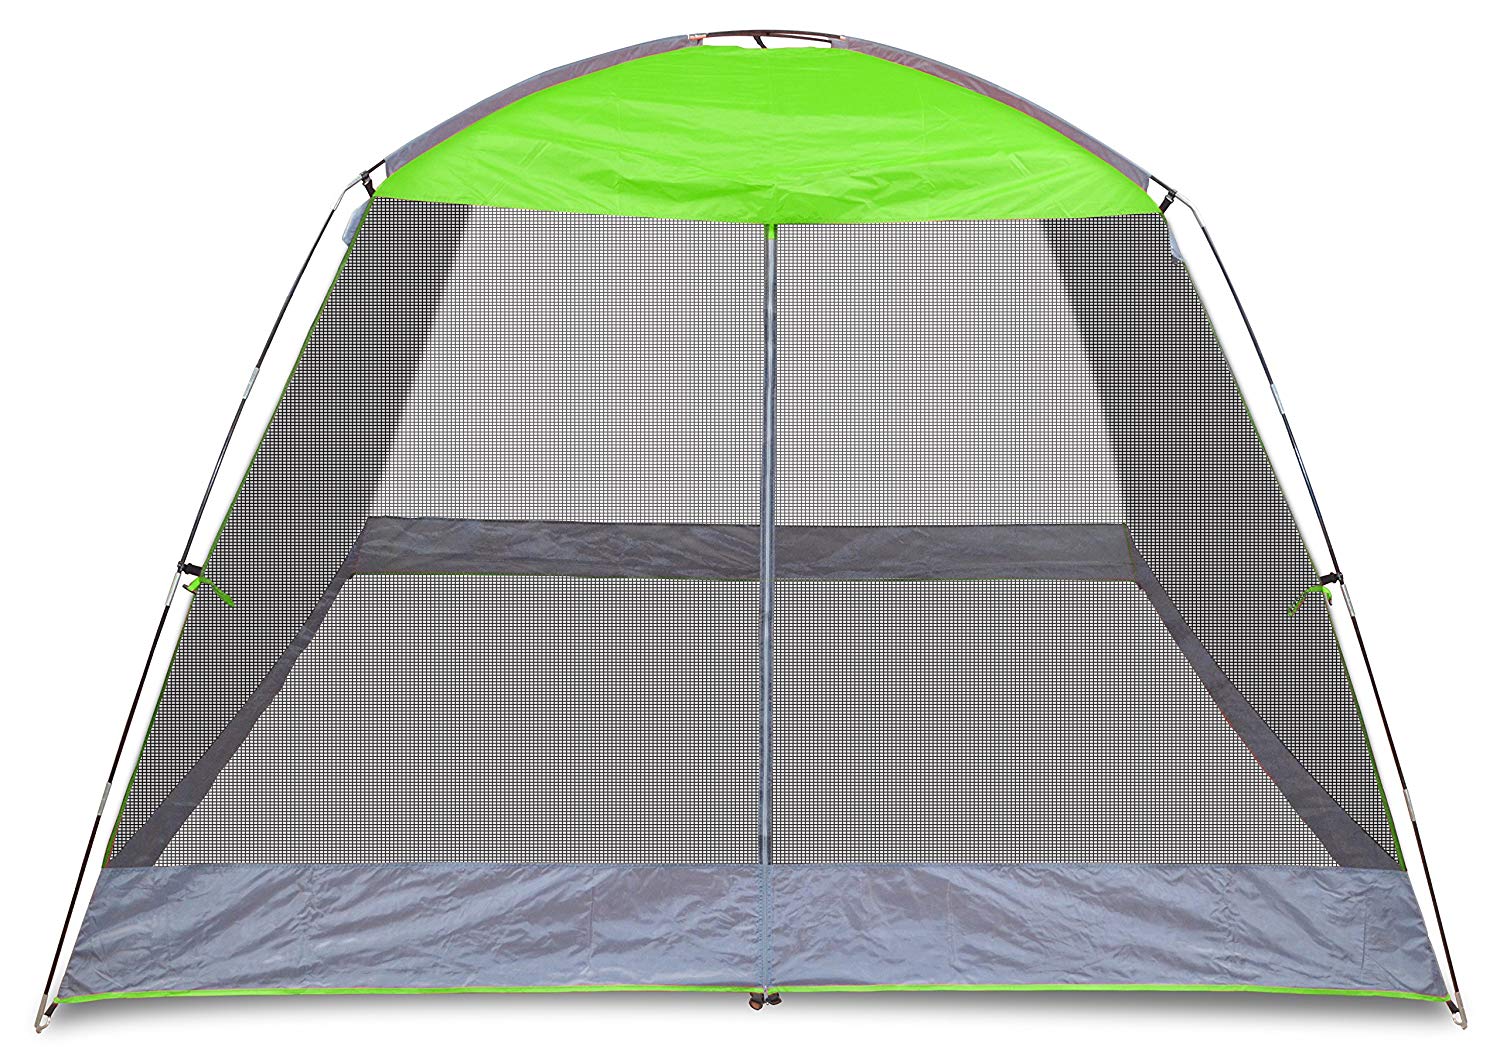 Caravan Canopy 81018013320 Sports Screen House Shelter, 10 x 10', Lime Green